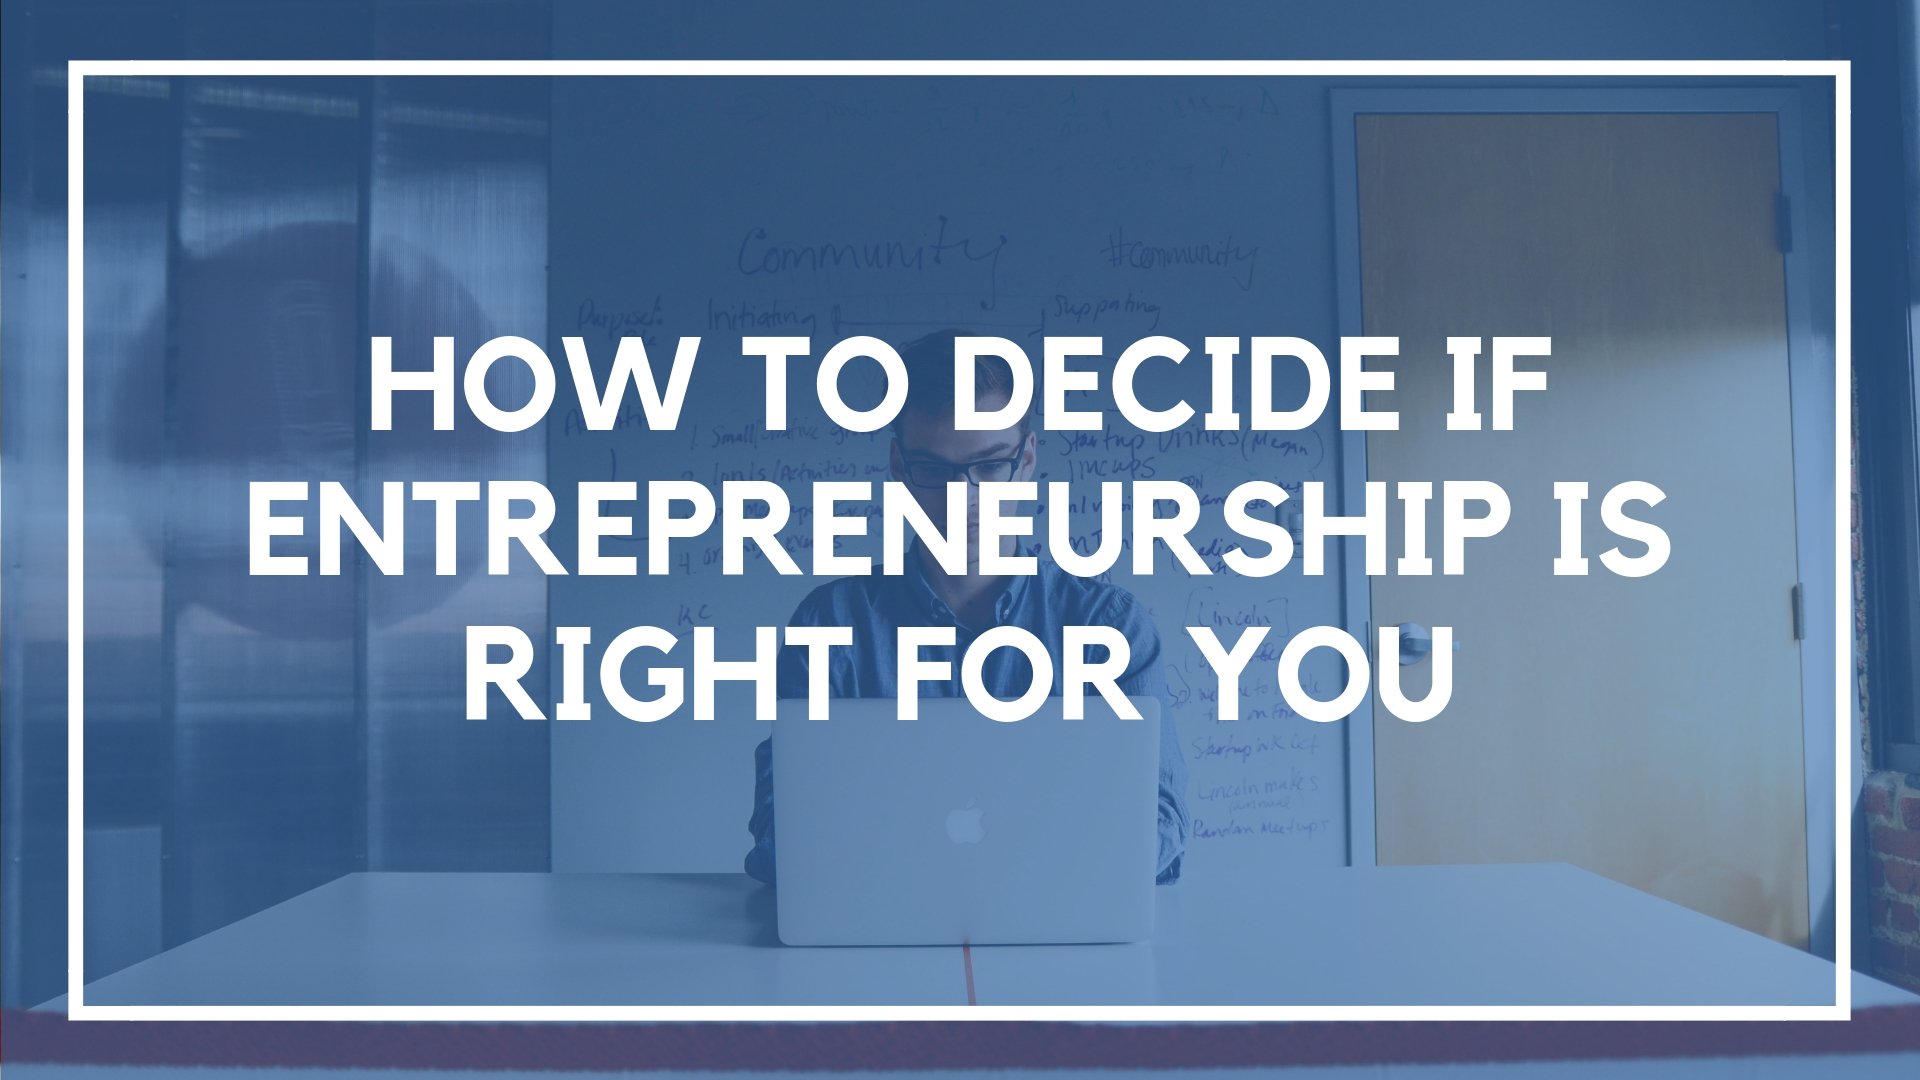 How to Decide if Entrepreneurship is Right for You